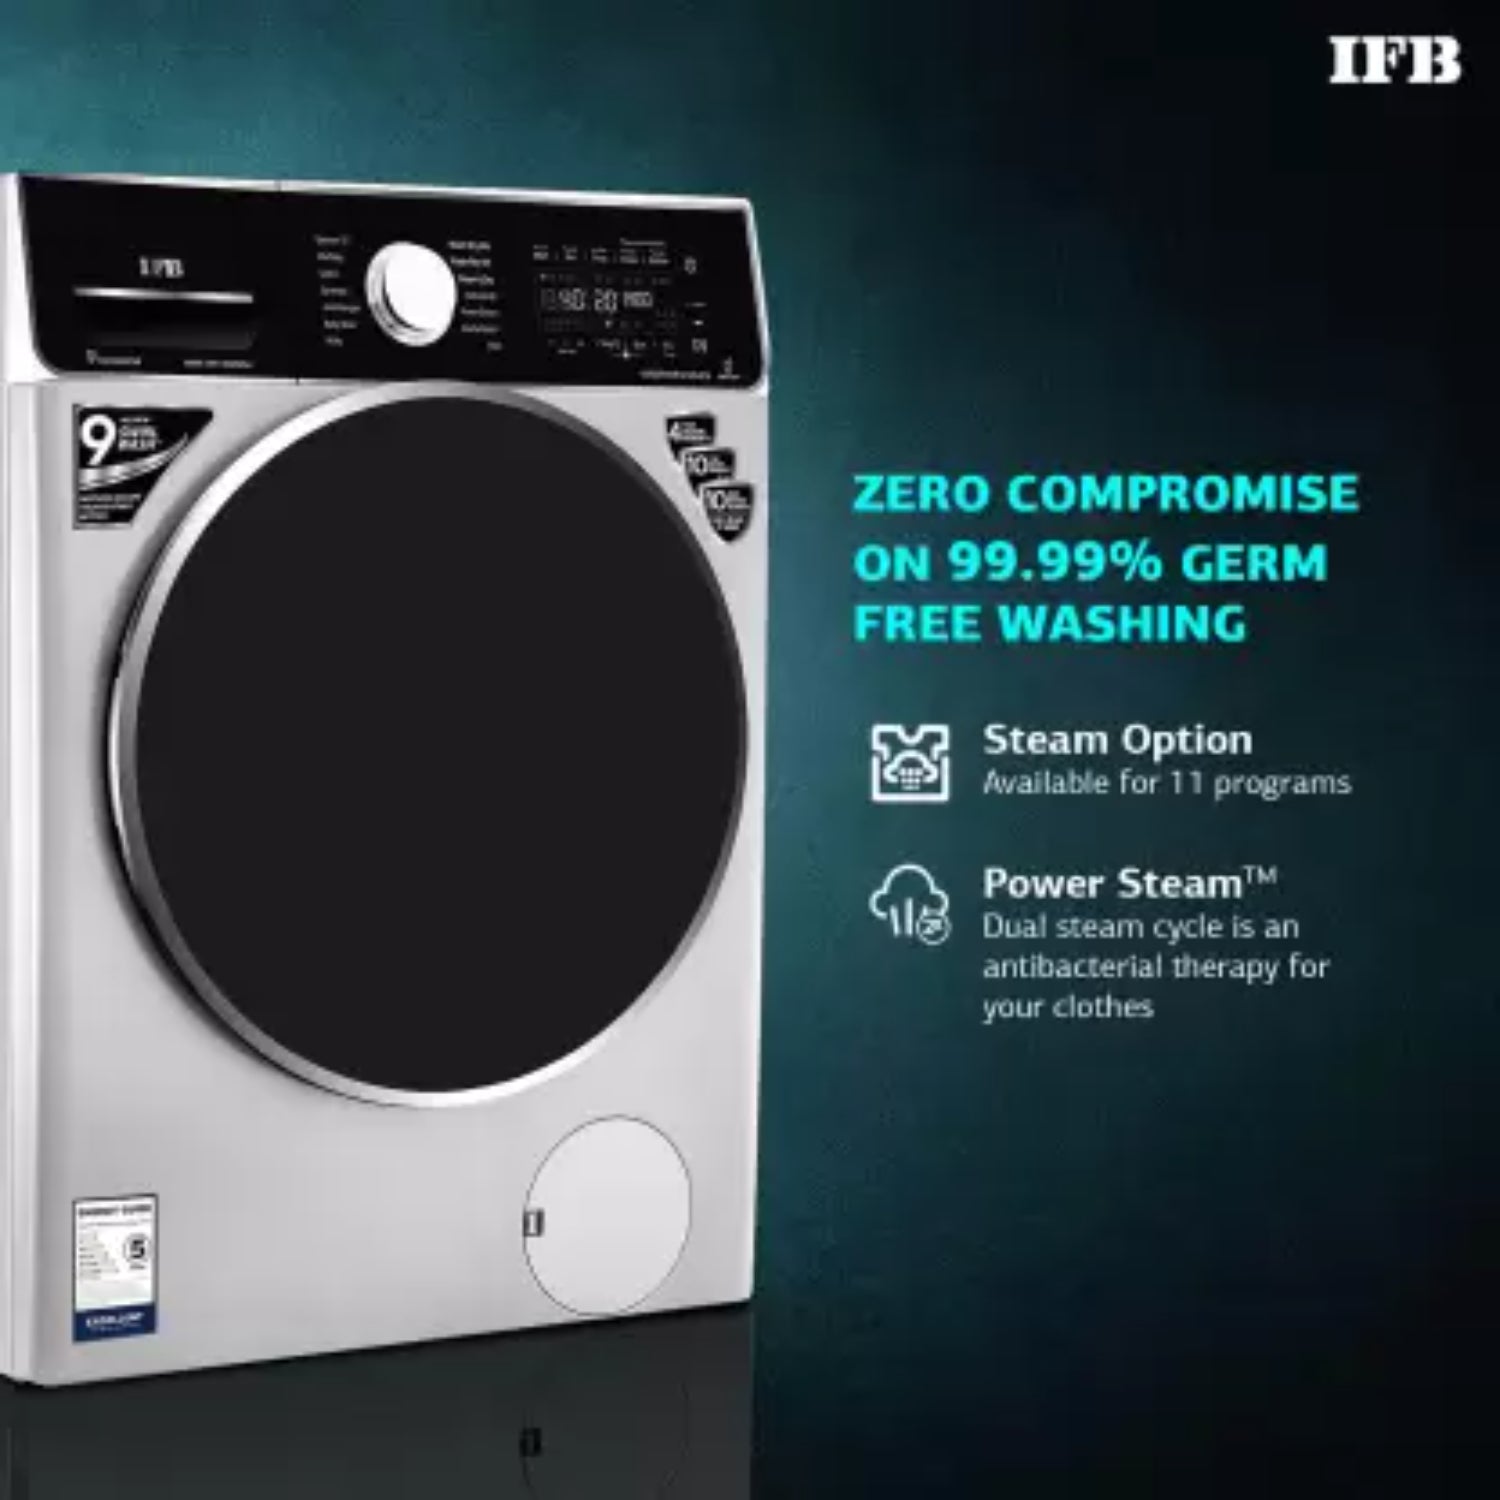 IFB 8.5/6.5 kg WD EXECUTIVE ZXS Washer Dryer Refresher